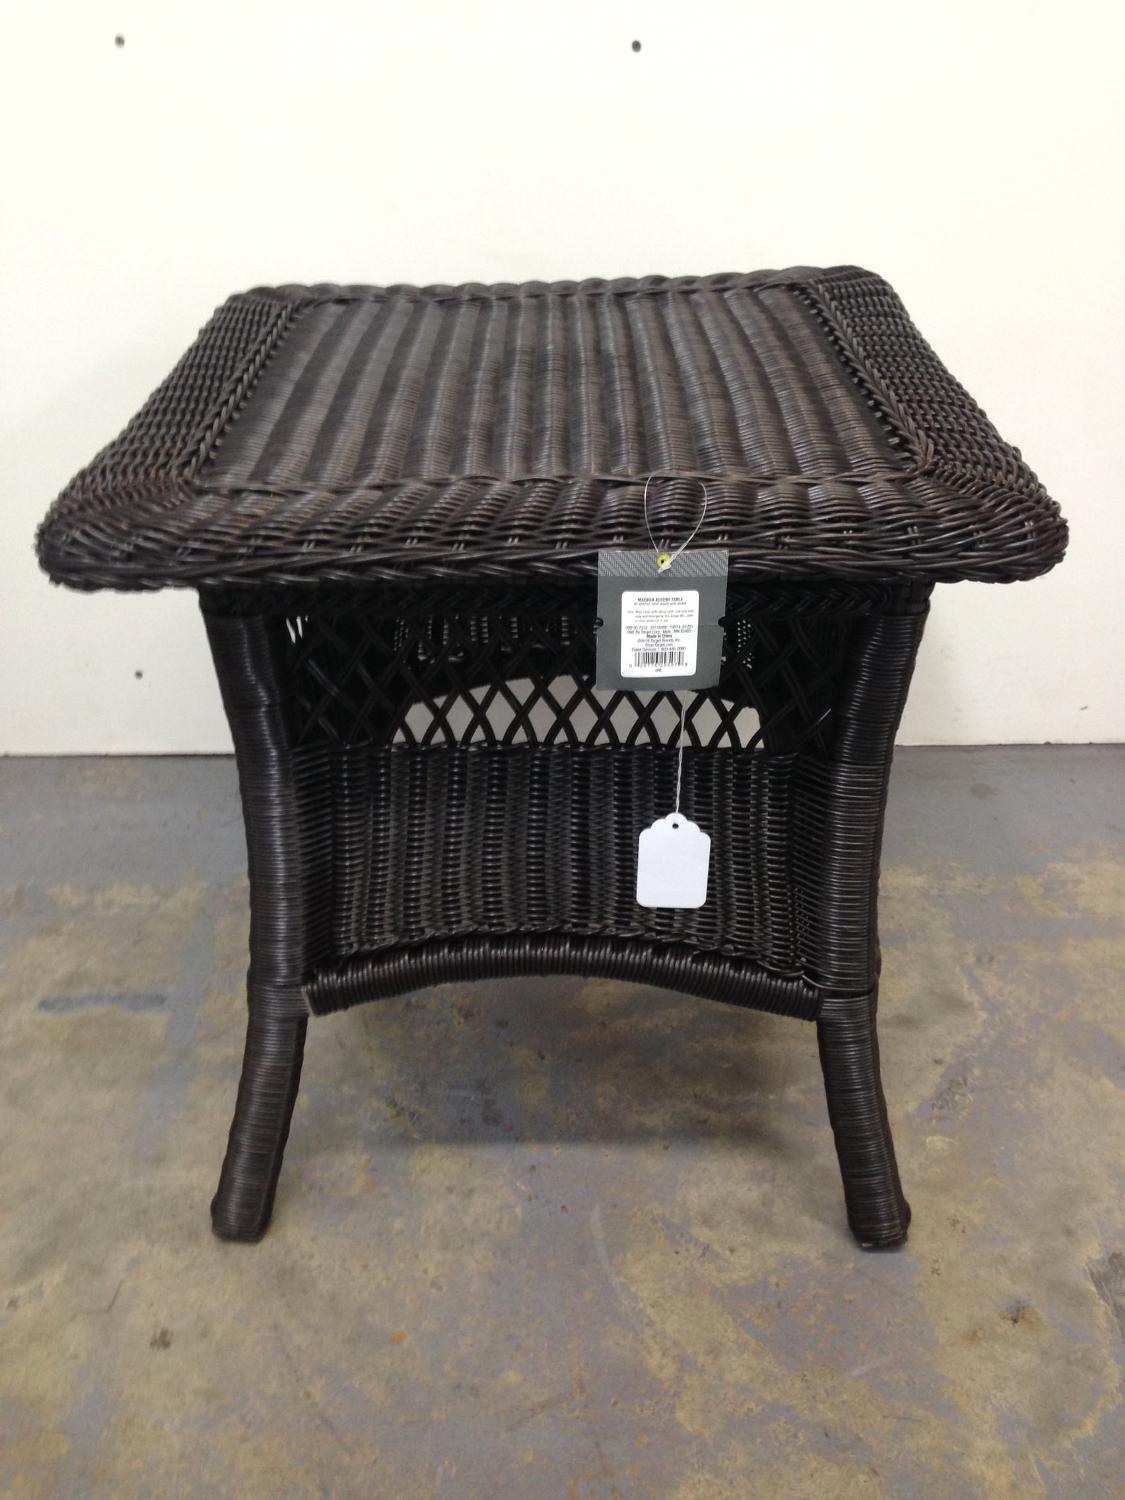 luxury gallery inspirations about threshold wicker patio storage perfect accent table from best brand new for umbrella mid century modern dining room chairs average coffee height